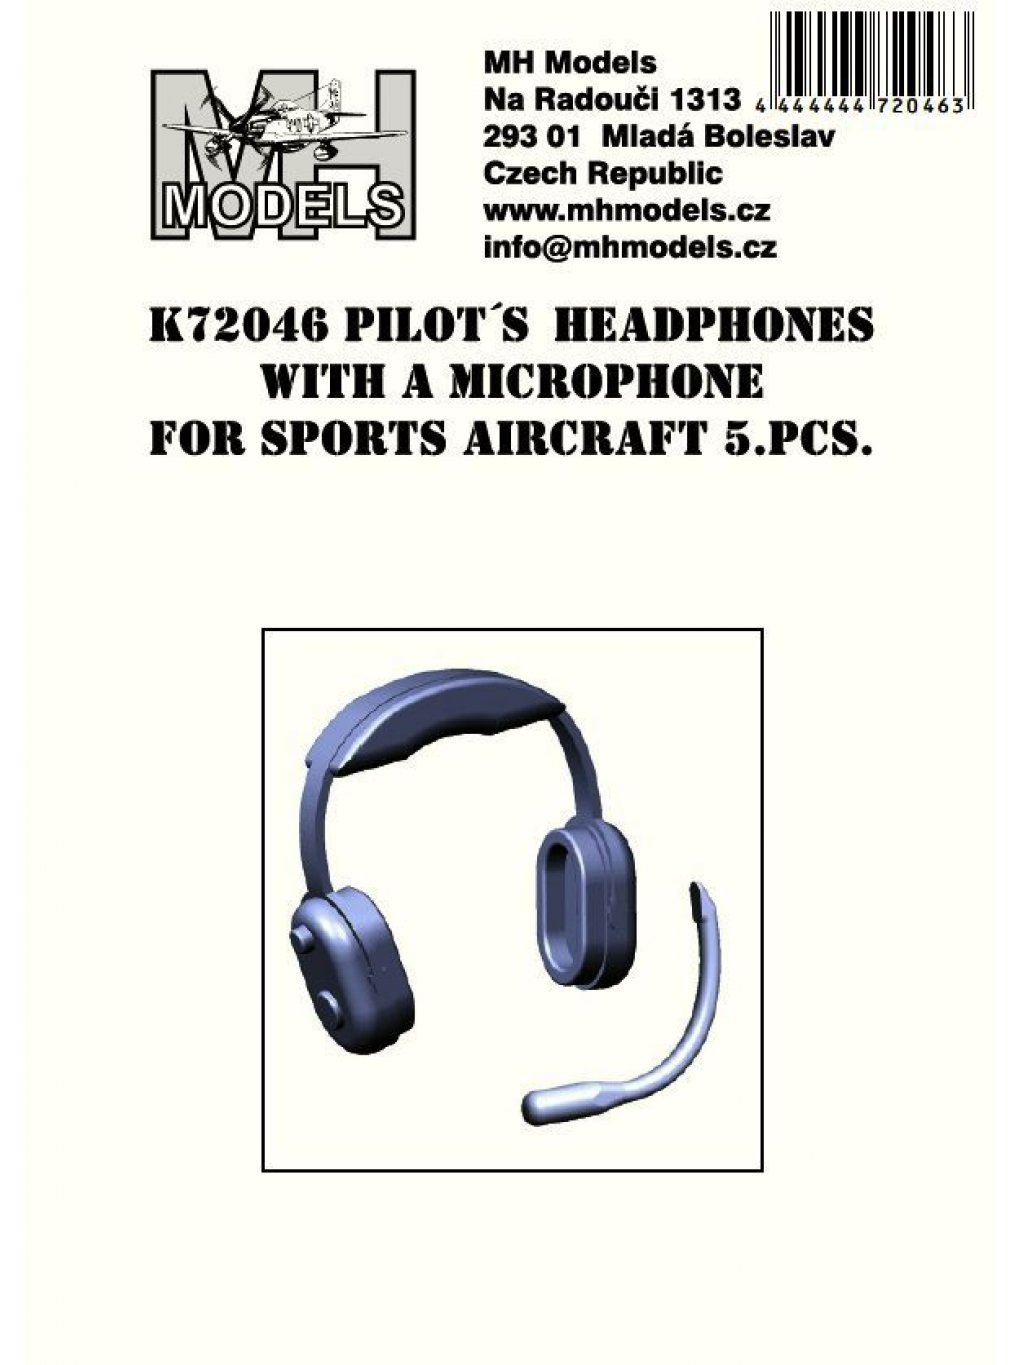 Pilot´s headphones with a microphone for sports aircraft 5pcs.